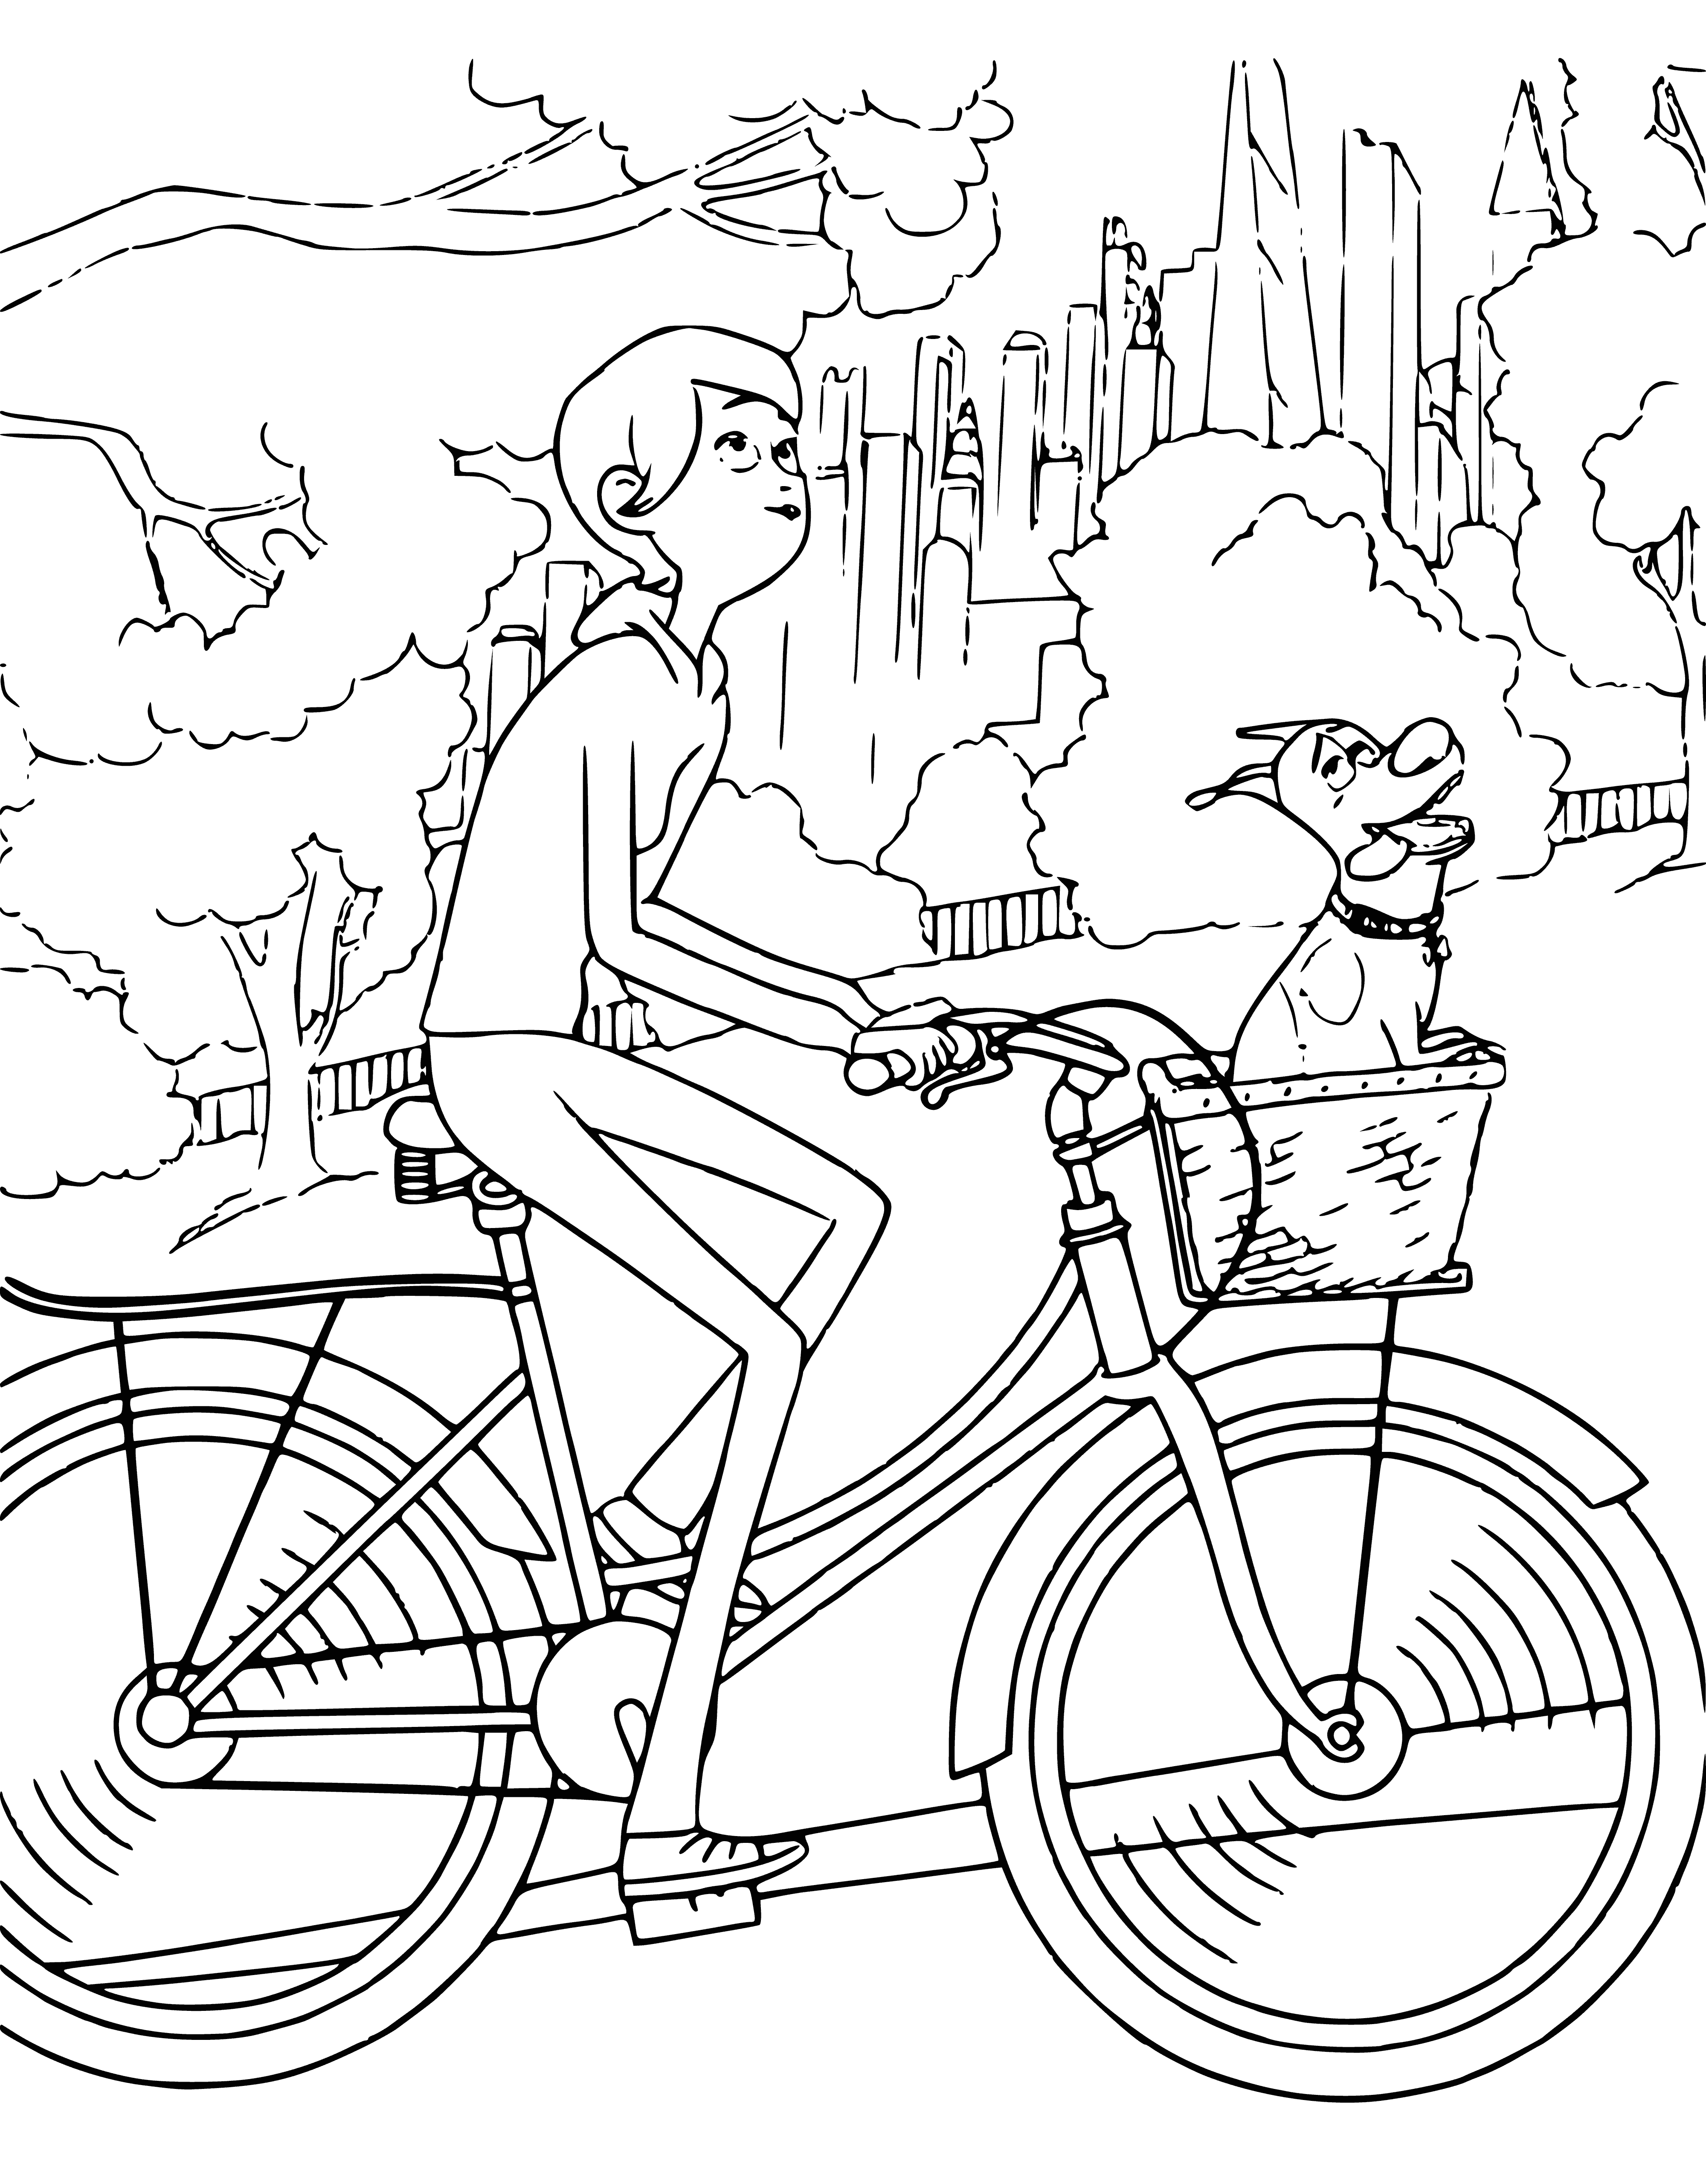 Katie and Max coloring page